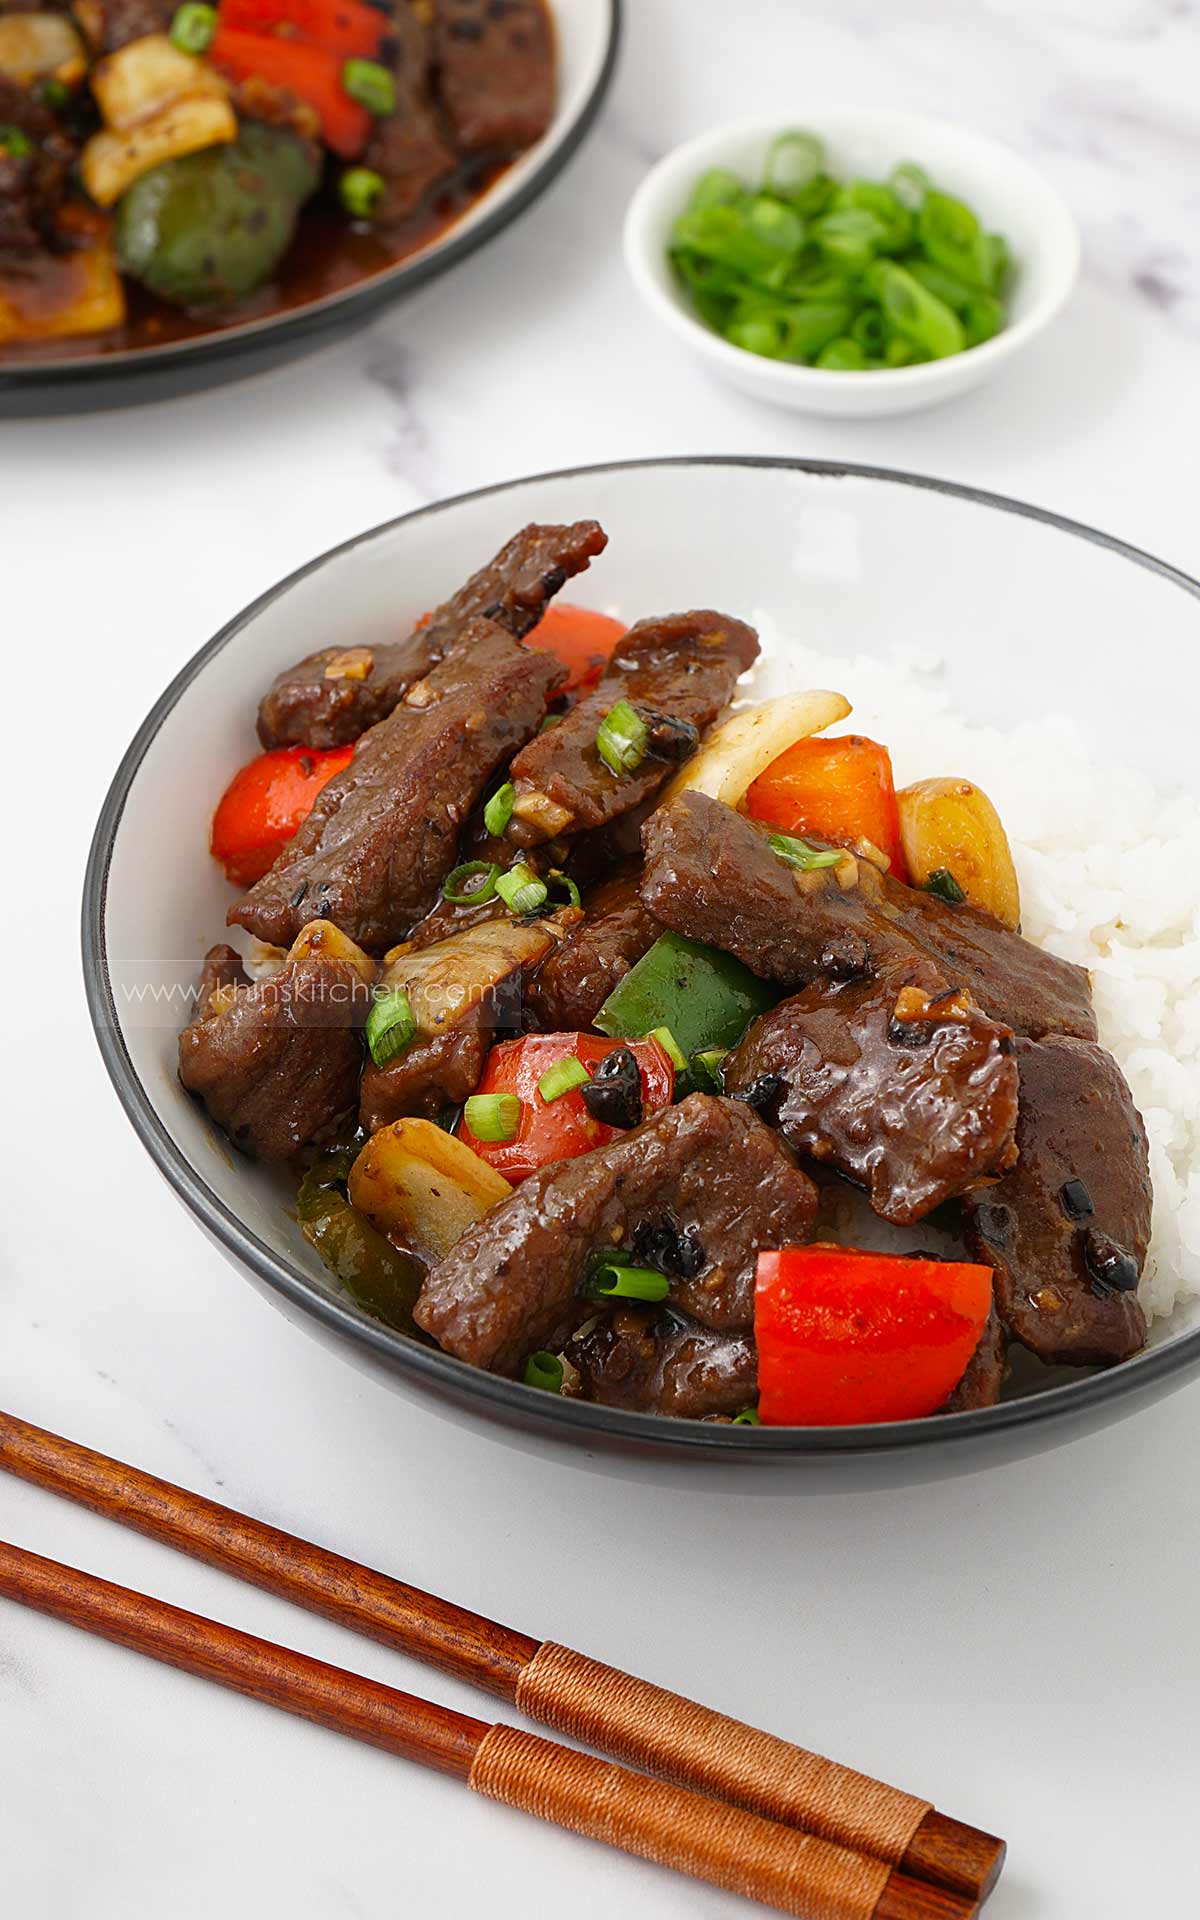 White bowl containing beef stir fry with vegetables and black bean sauce, over white rice.